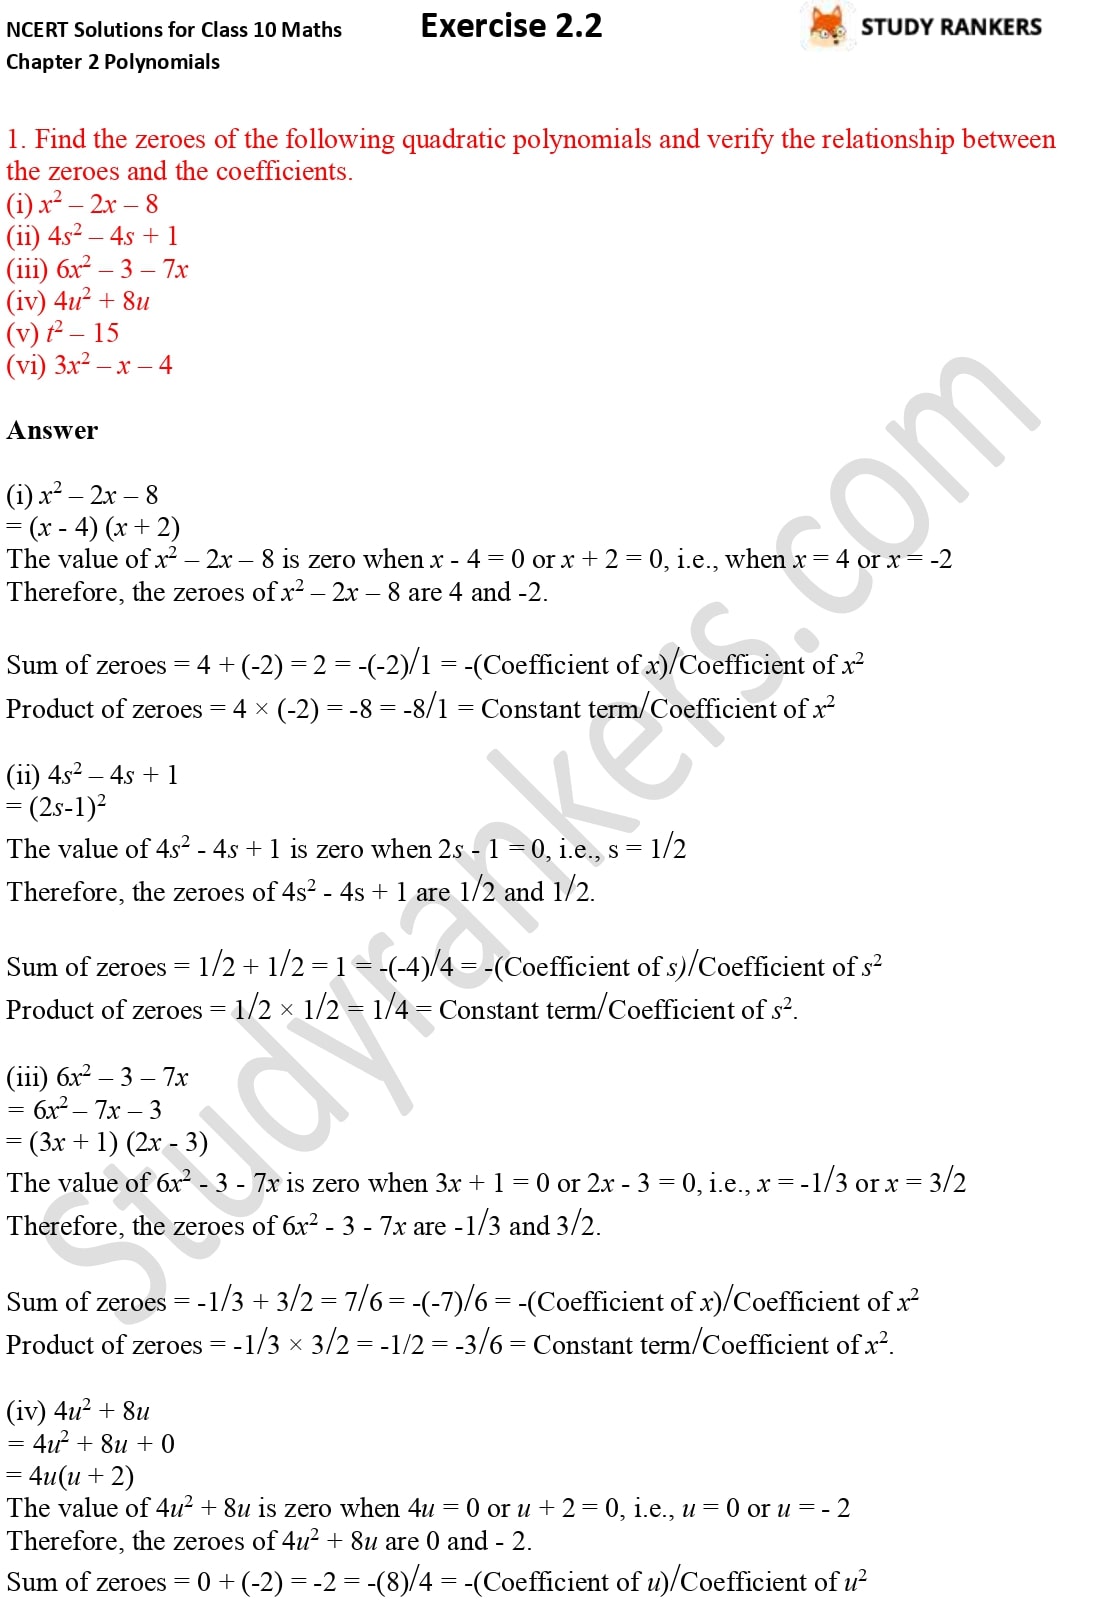 Ncert Solutions For Class 10 Maths Chapter 2 Polynomials Exercise 2 2